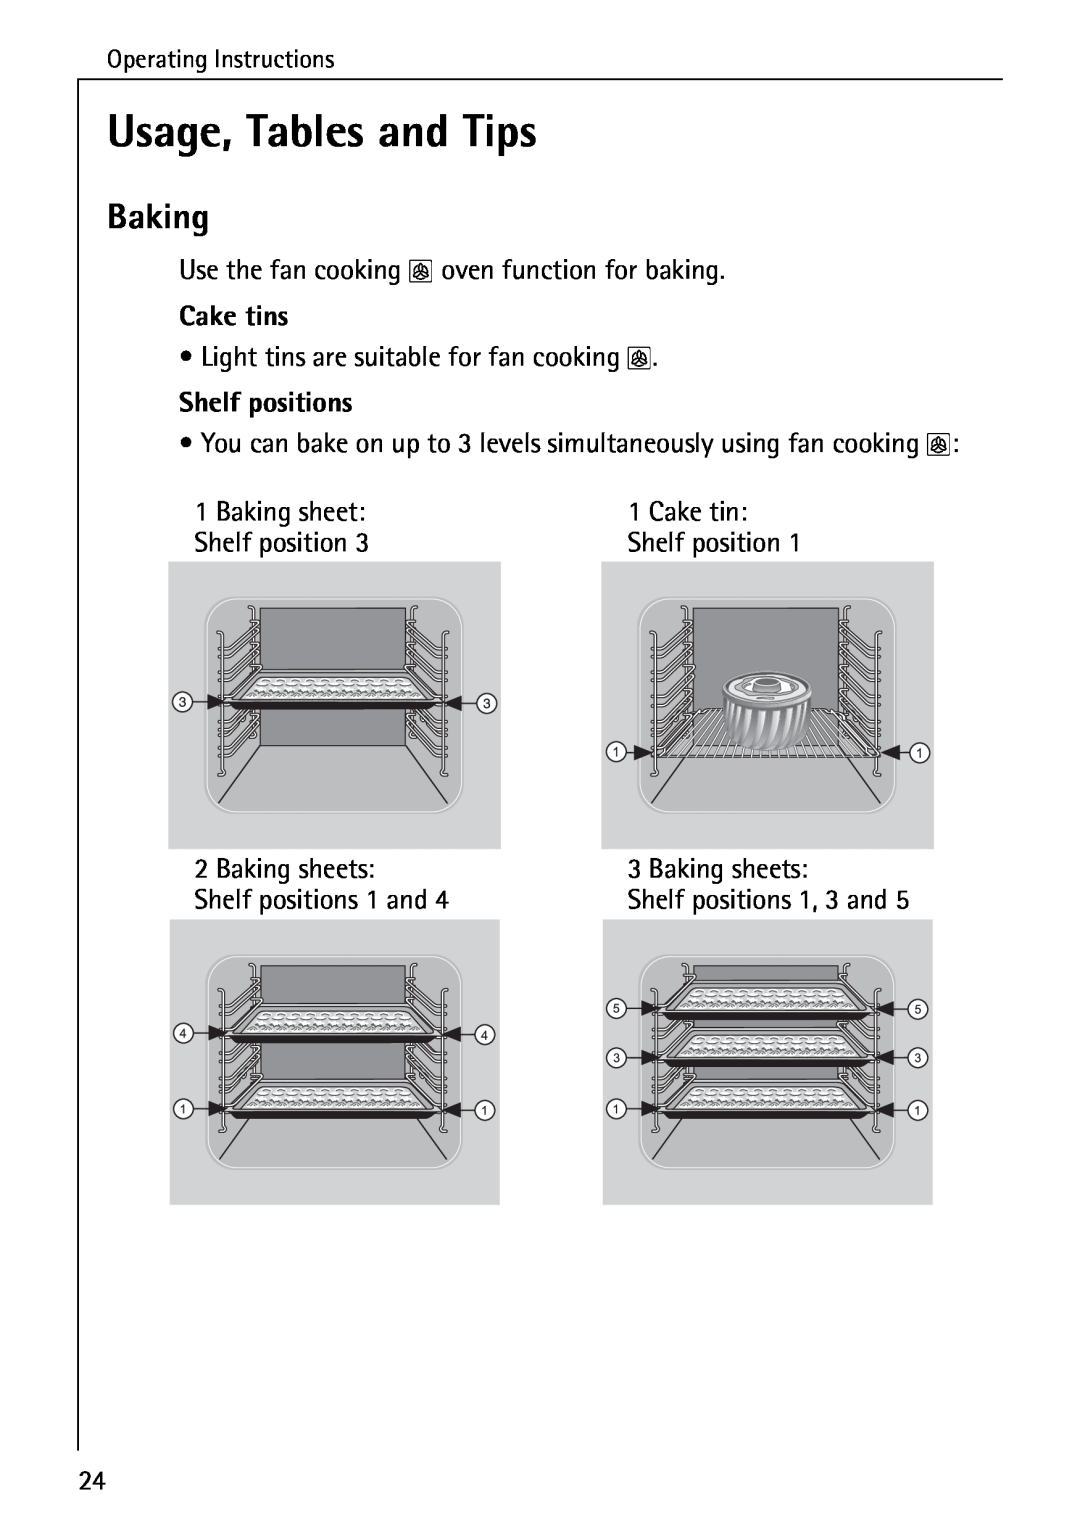 Electrolux B2190-1 manual Usage, Tables and Tips, Baking, Cake tins, Shelf positions 